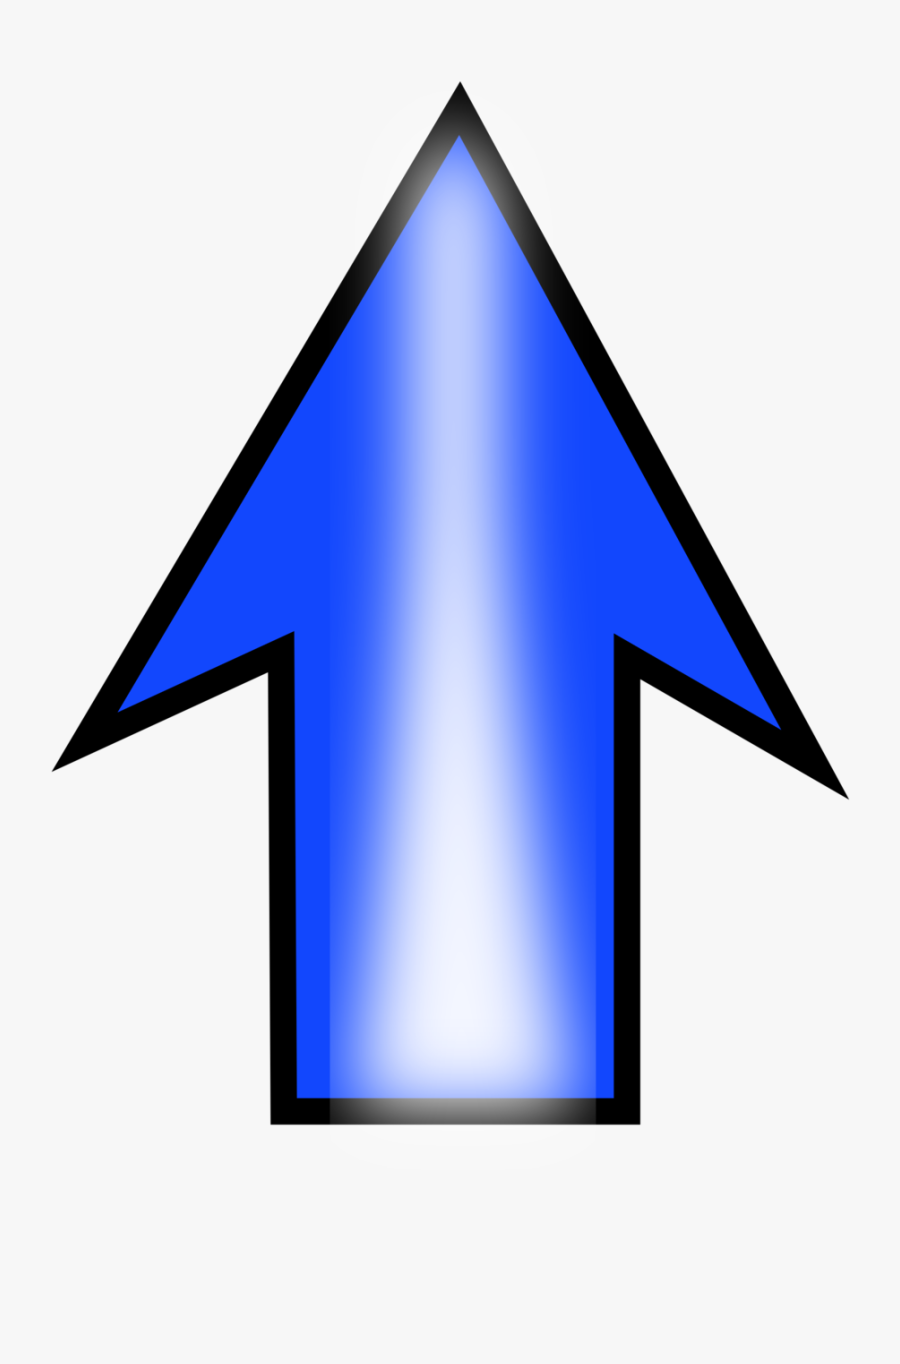 Arrow Pointing Up Png, Transparent Clipart